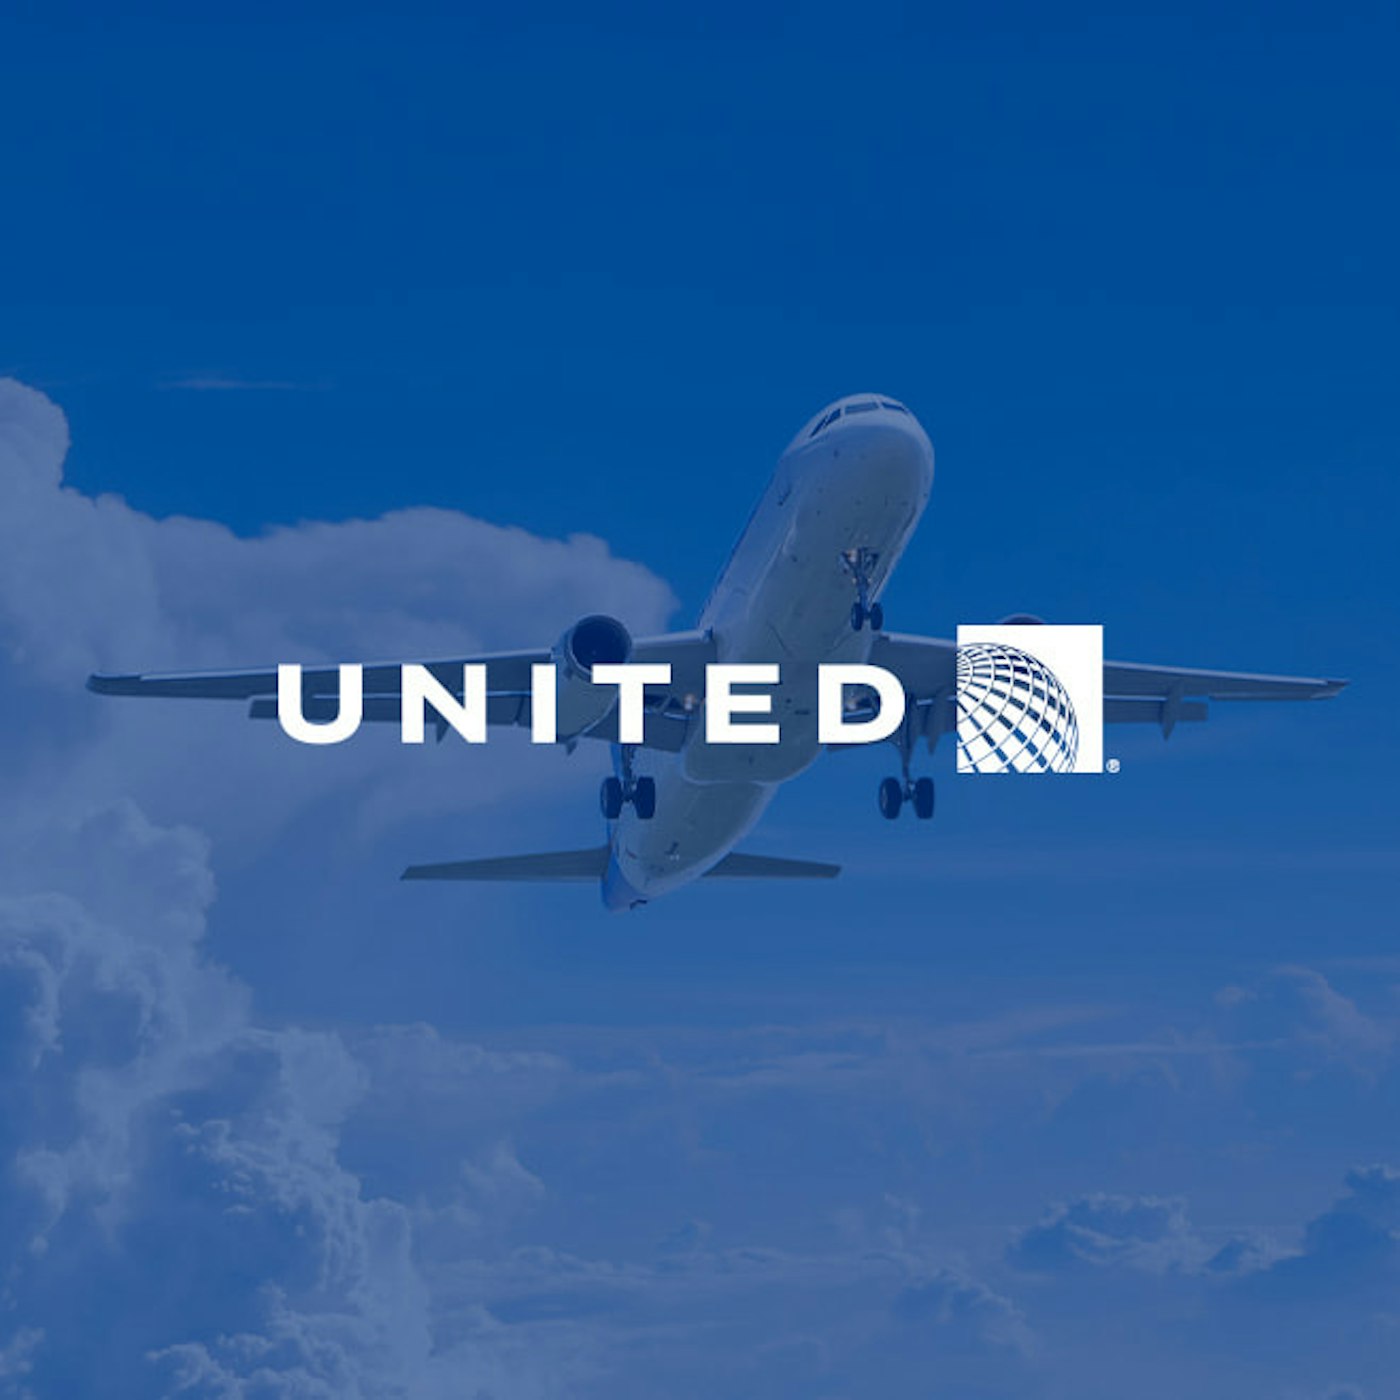 United Airlines customer quote image